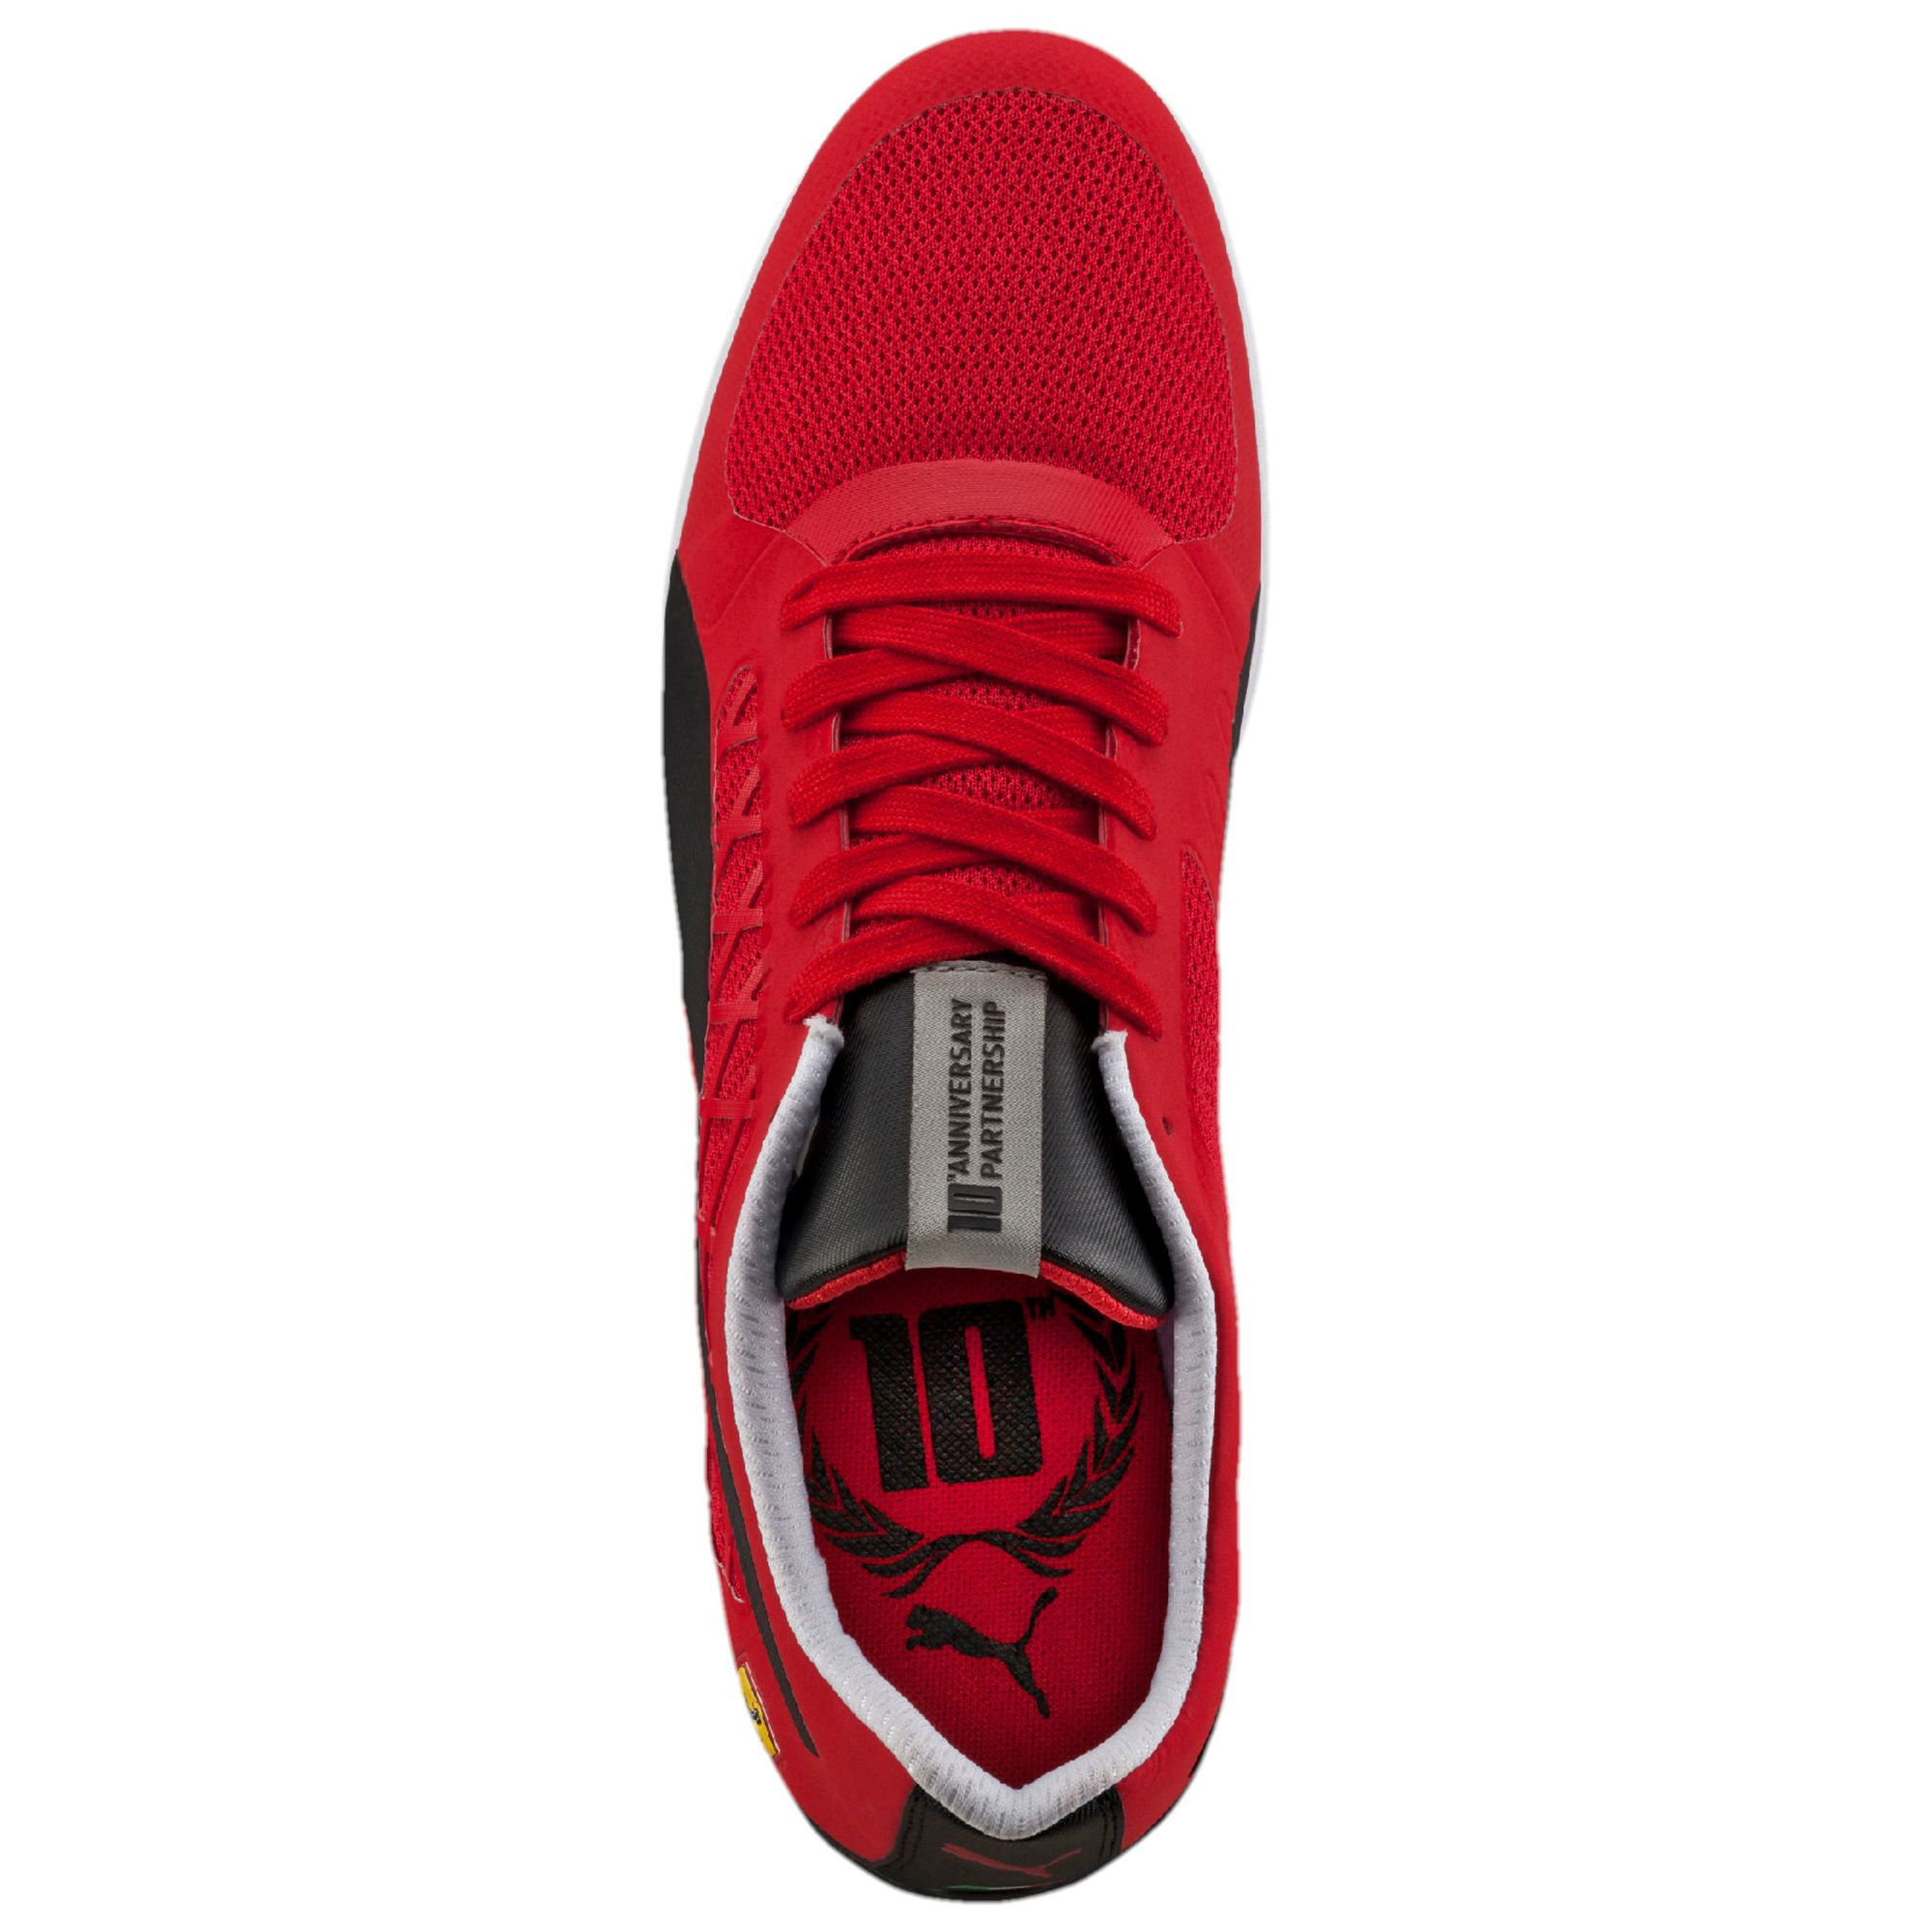 PUMA Synthetic Ferrari Valorosso 2 Men's Shoes in Red for Men - Lyst